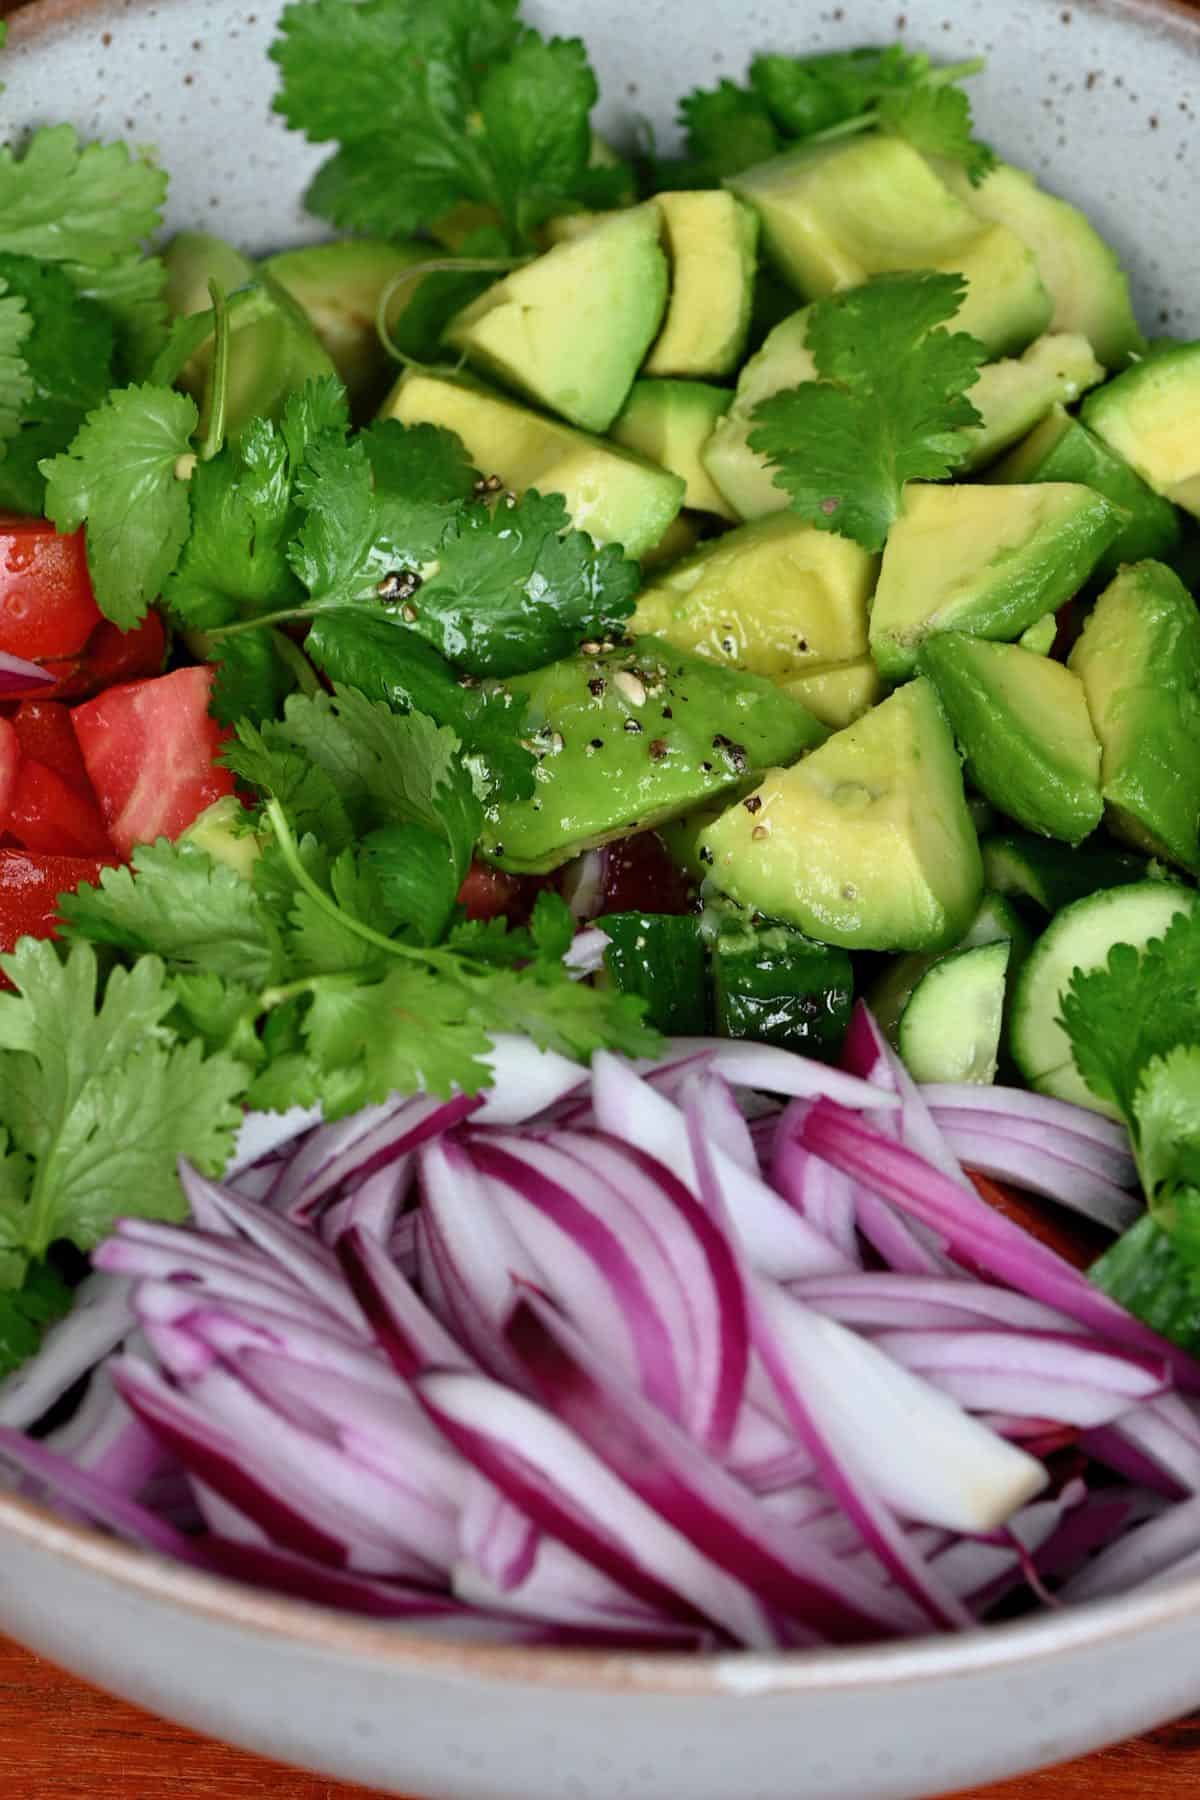 Salad ingredients topped with dressing